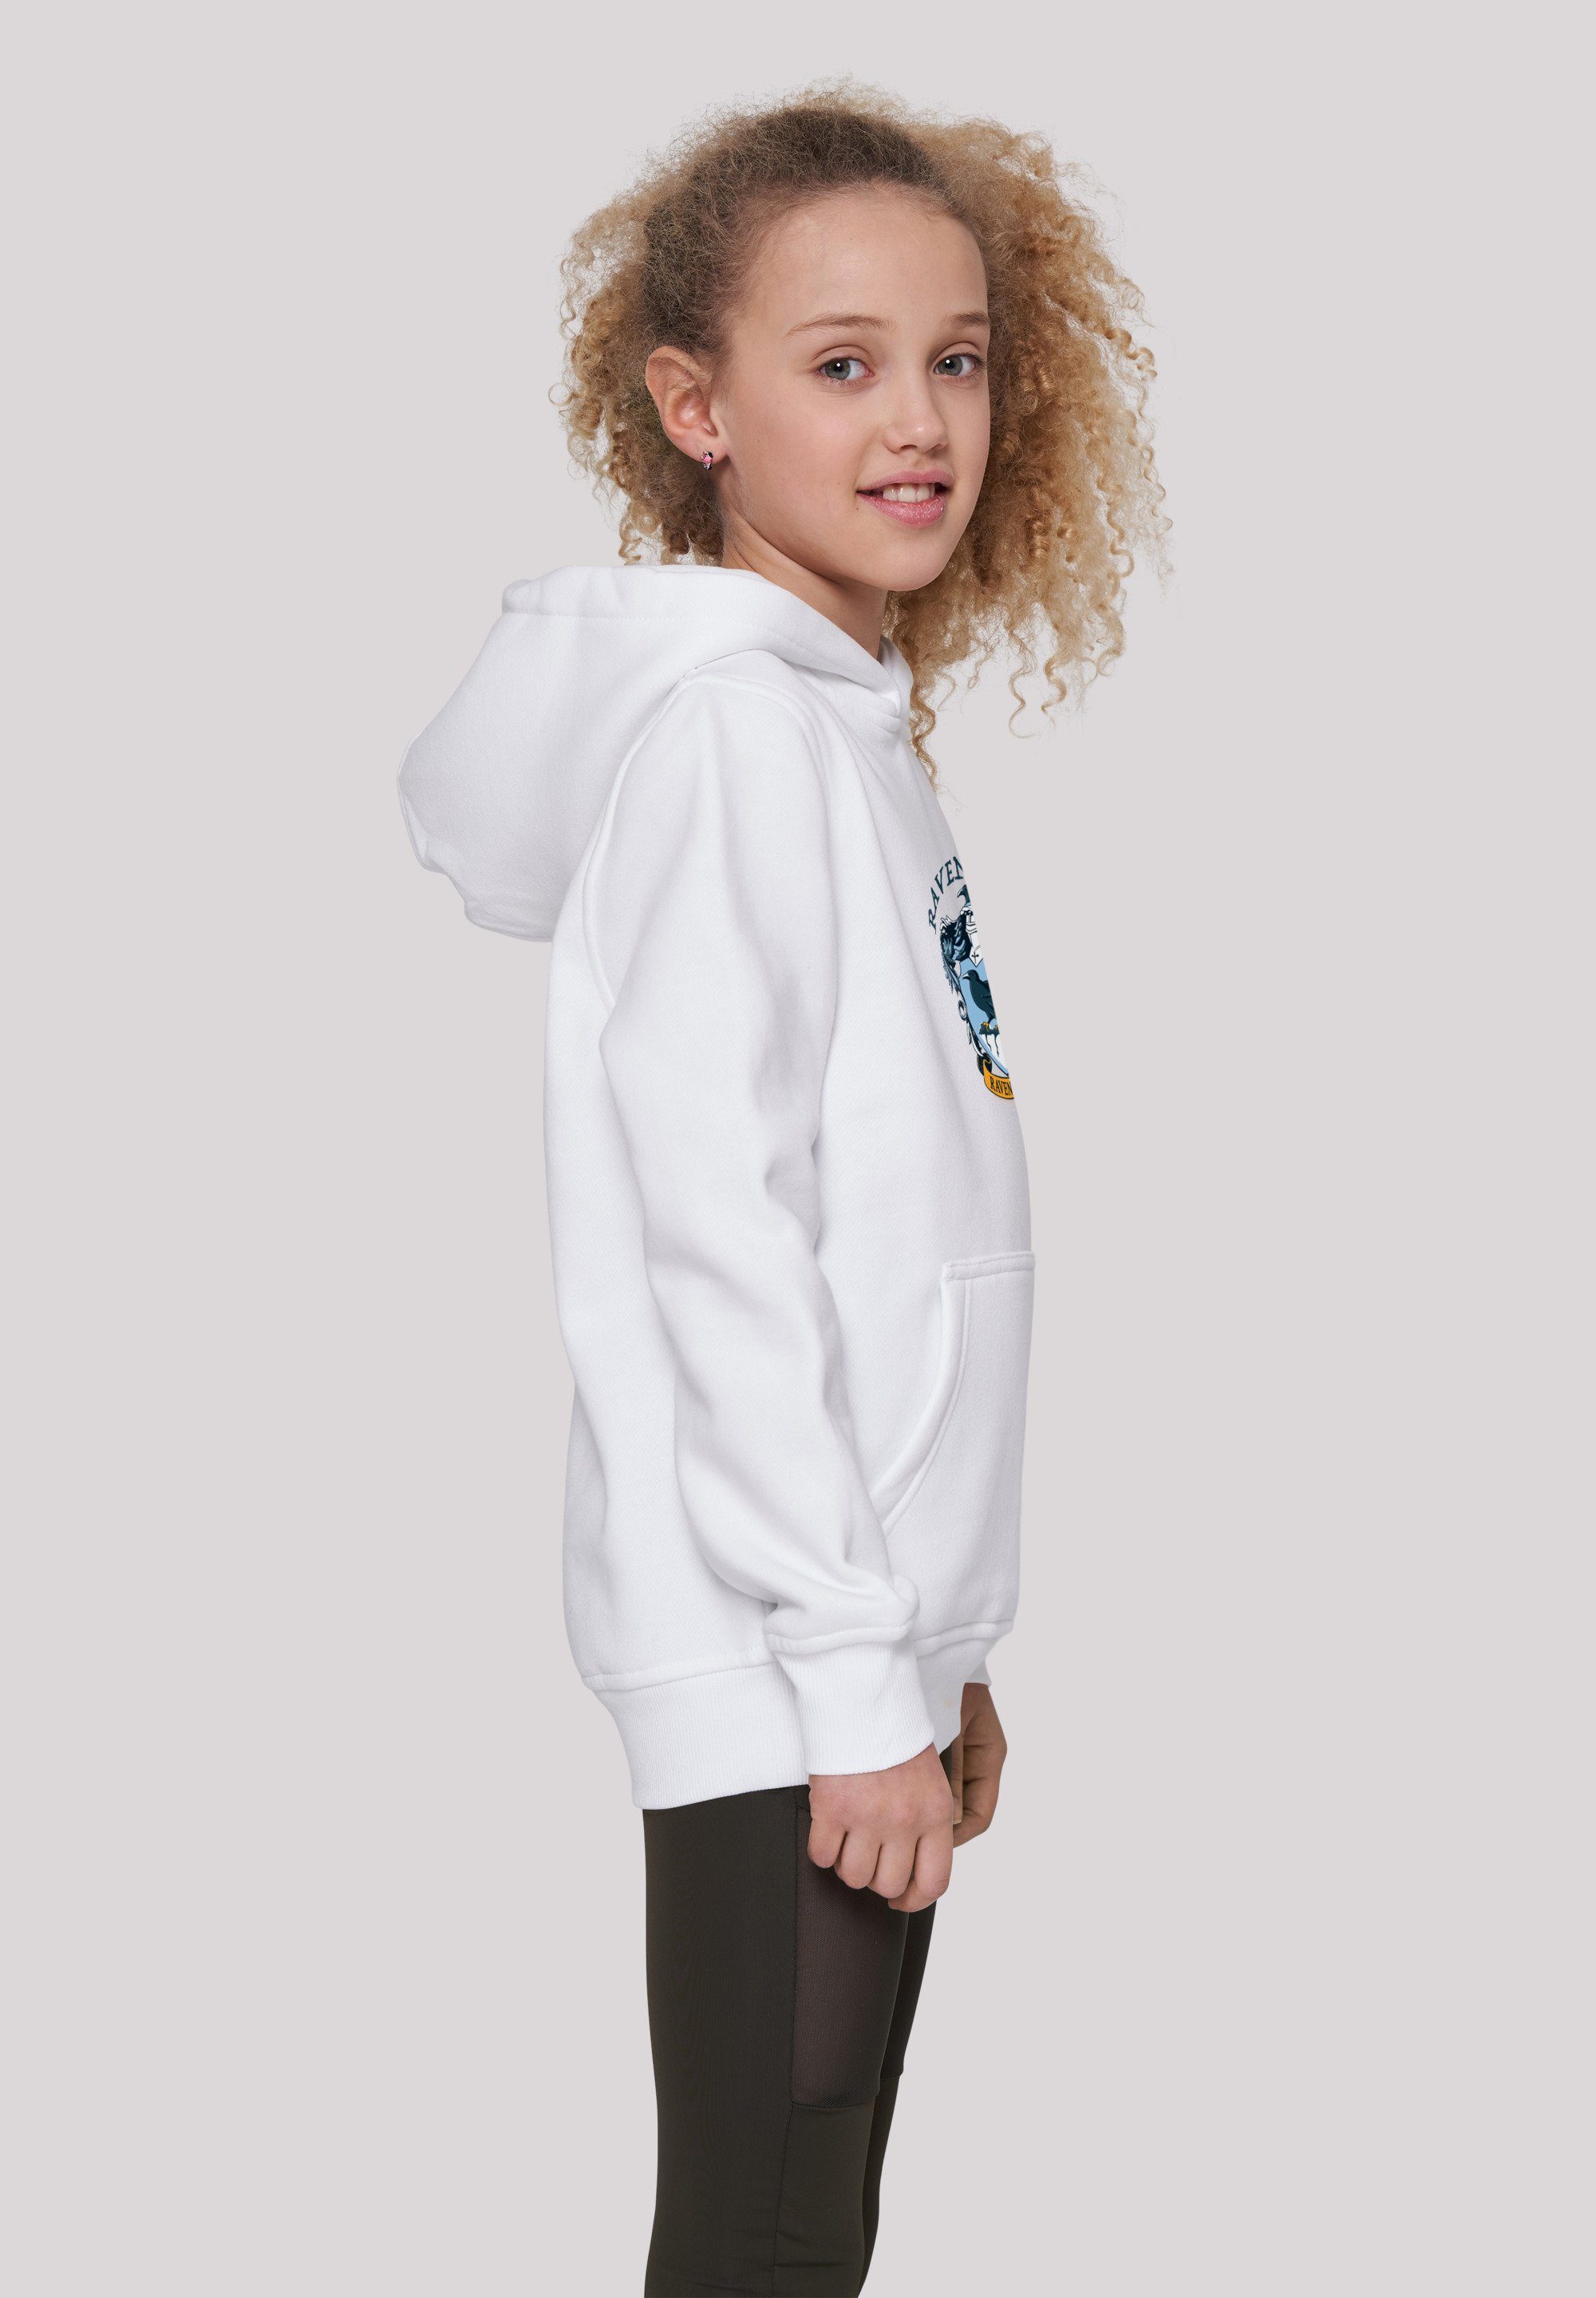 F4NT4STIC Hoodie Kinder Harry Kids Potter white Hoody with (1-tlg) Ravenclaw Basic Crest